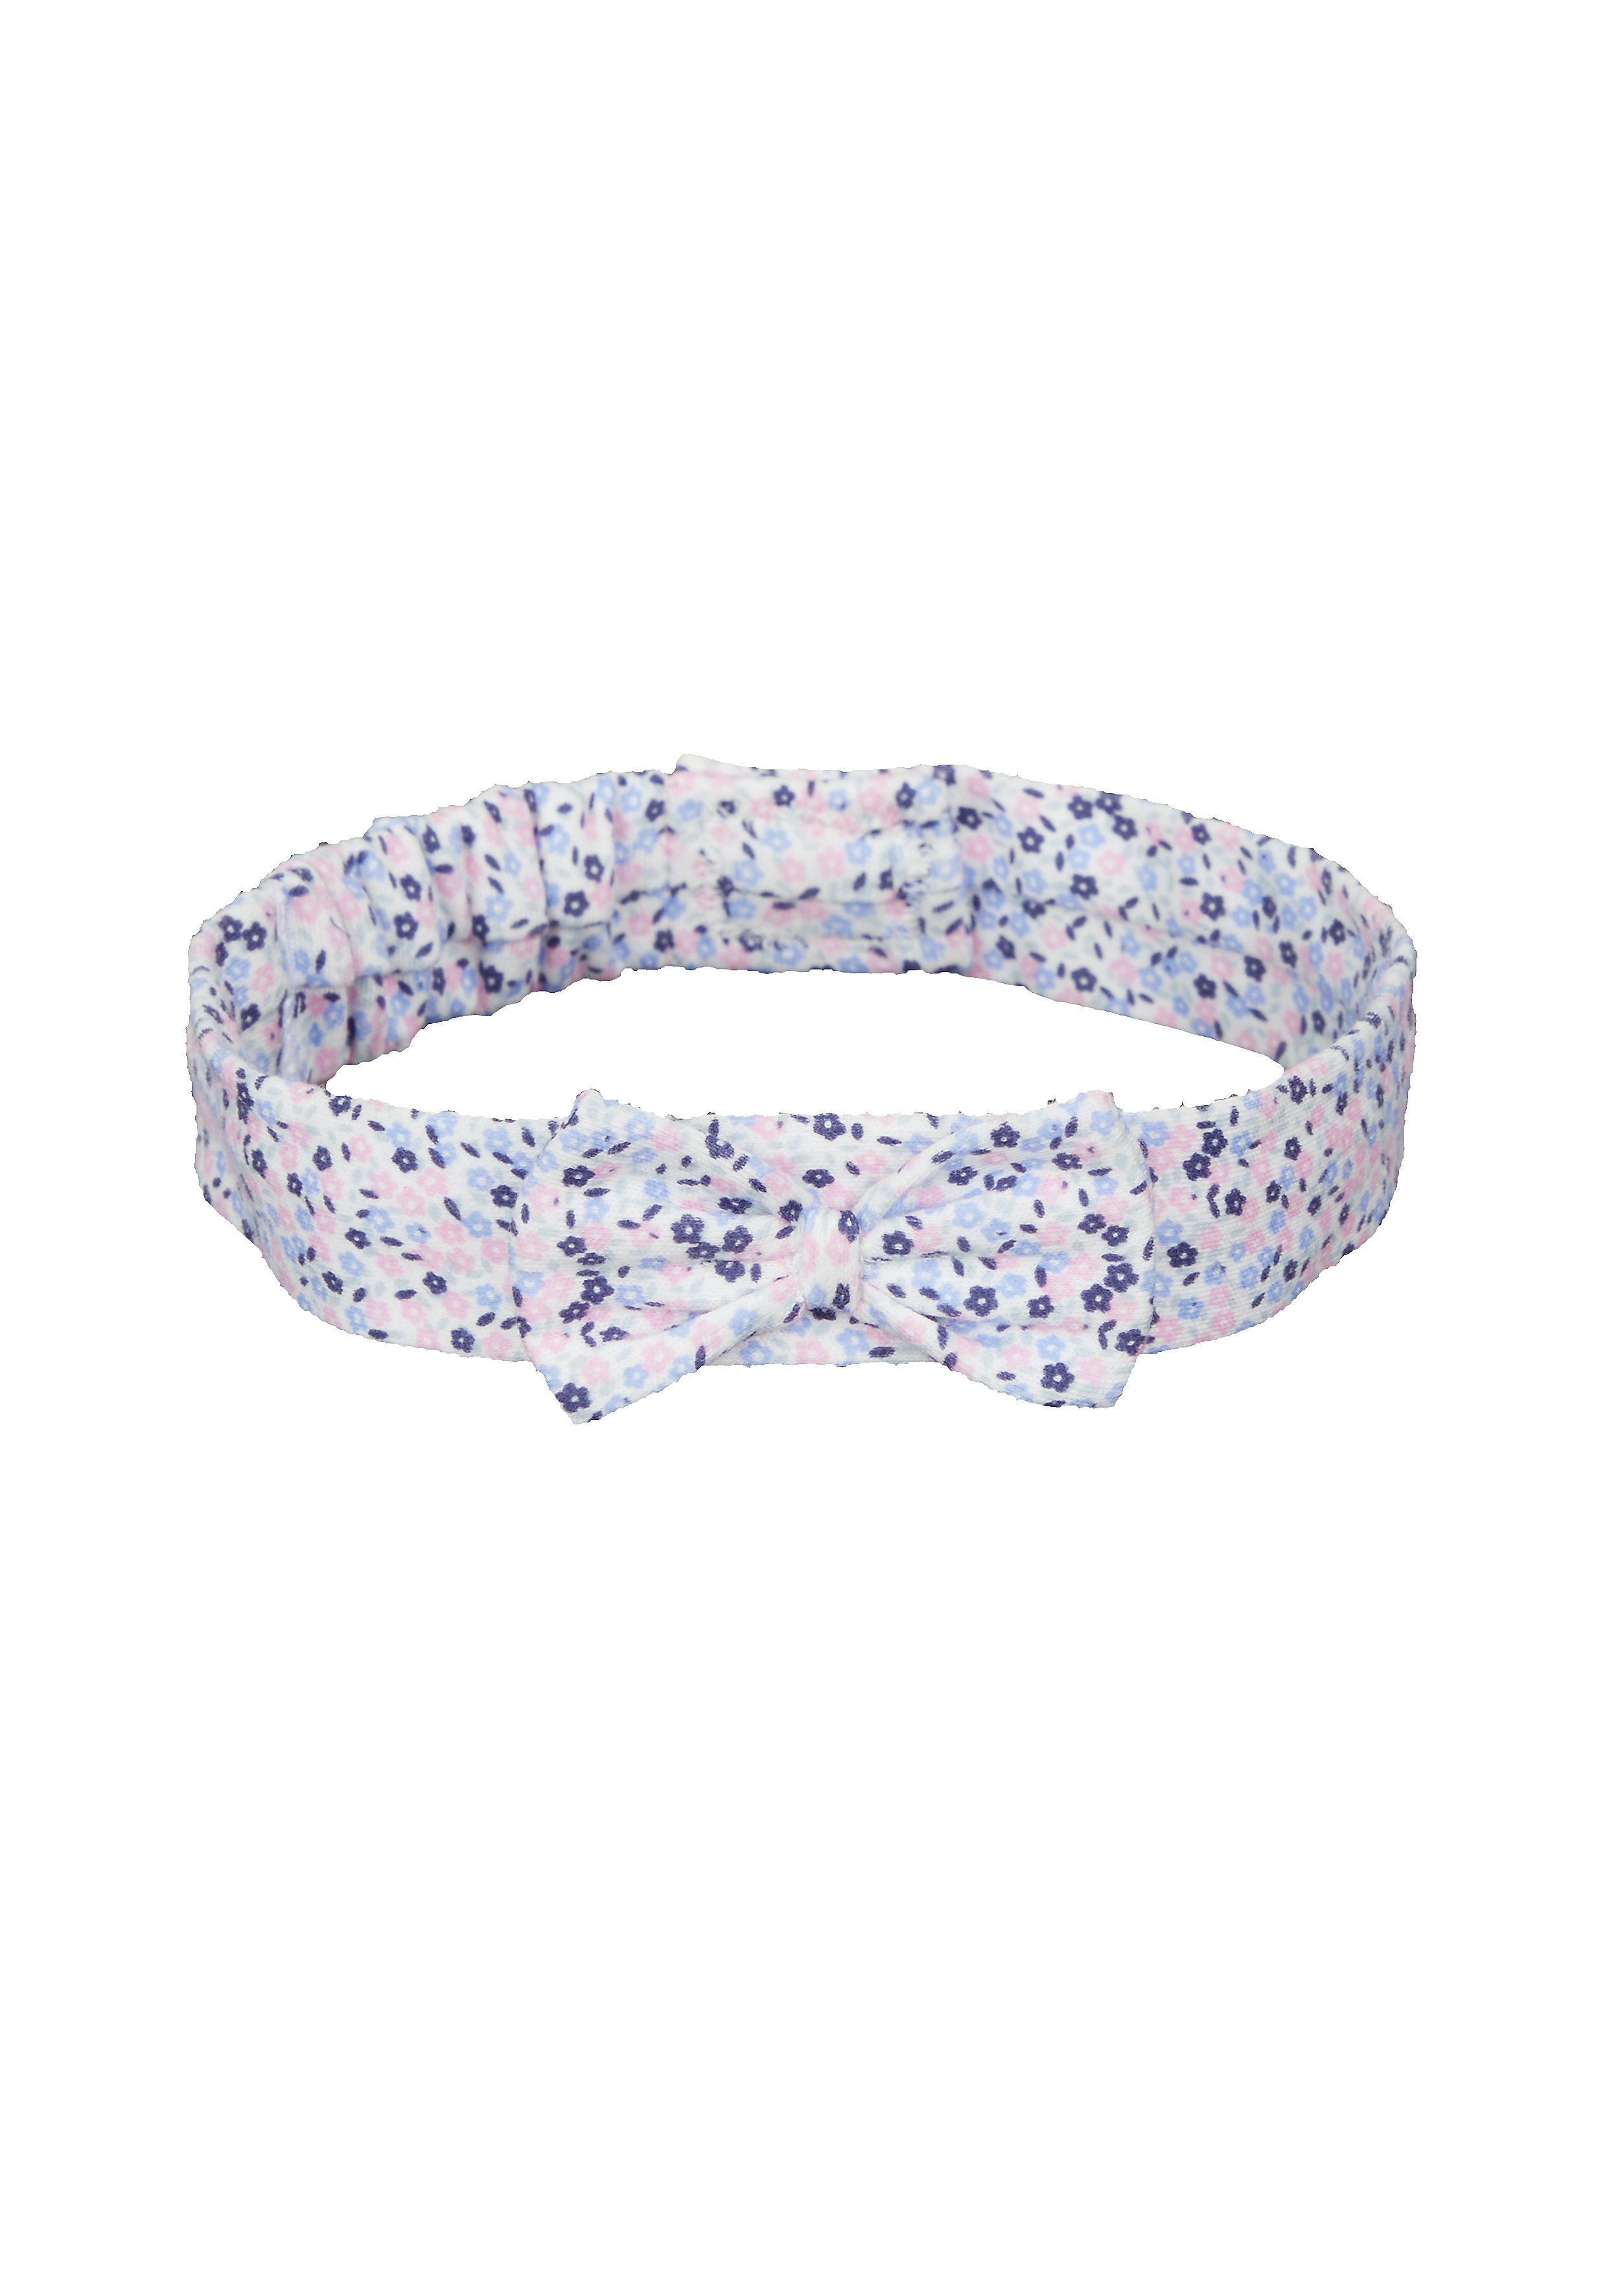 Mothercare | Girls Headband Floral Print - Pack Of 2 - Blue 2